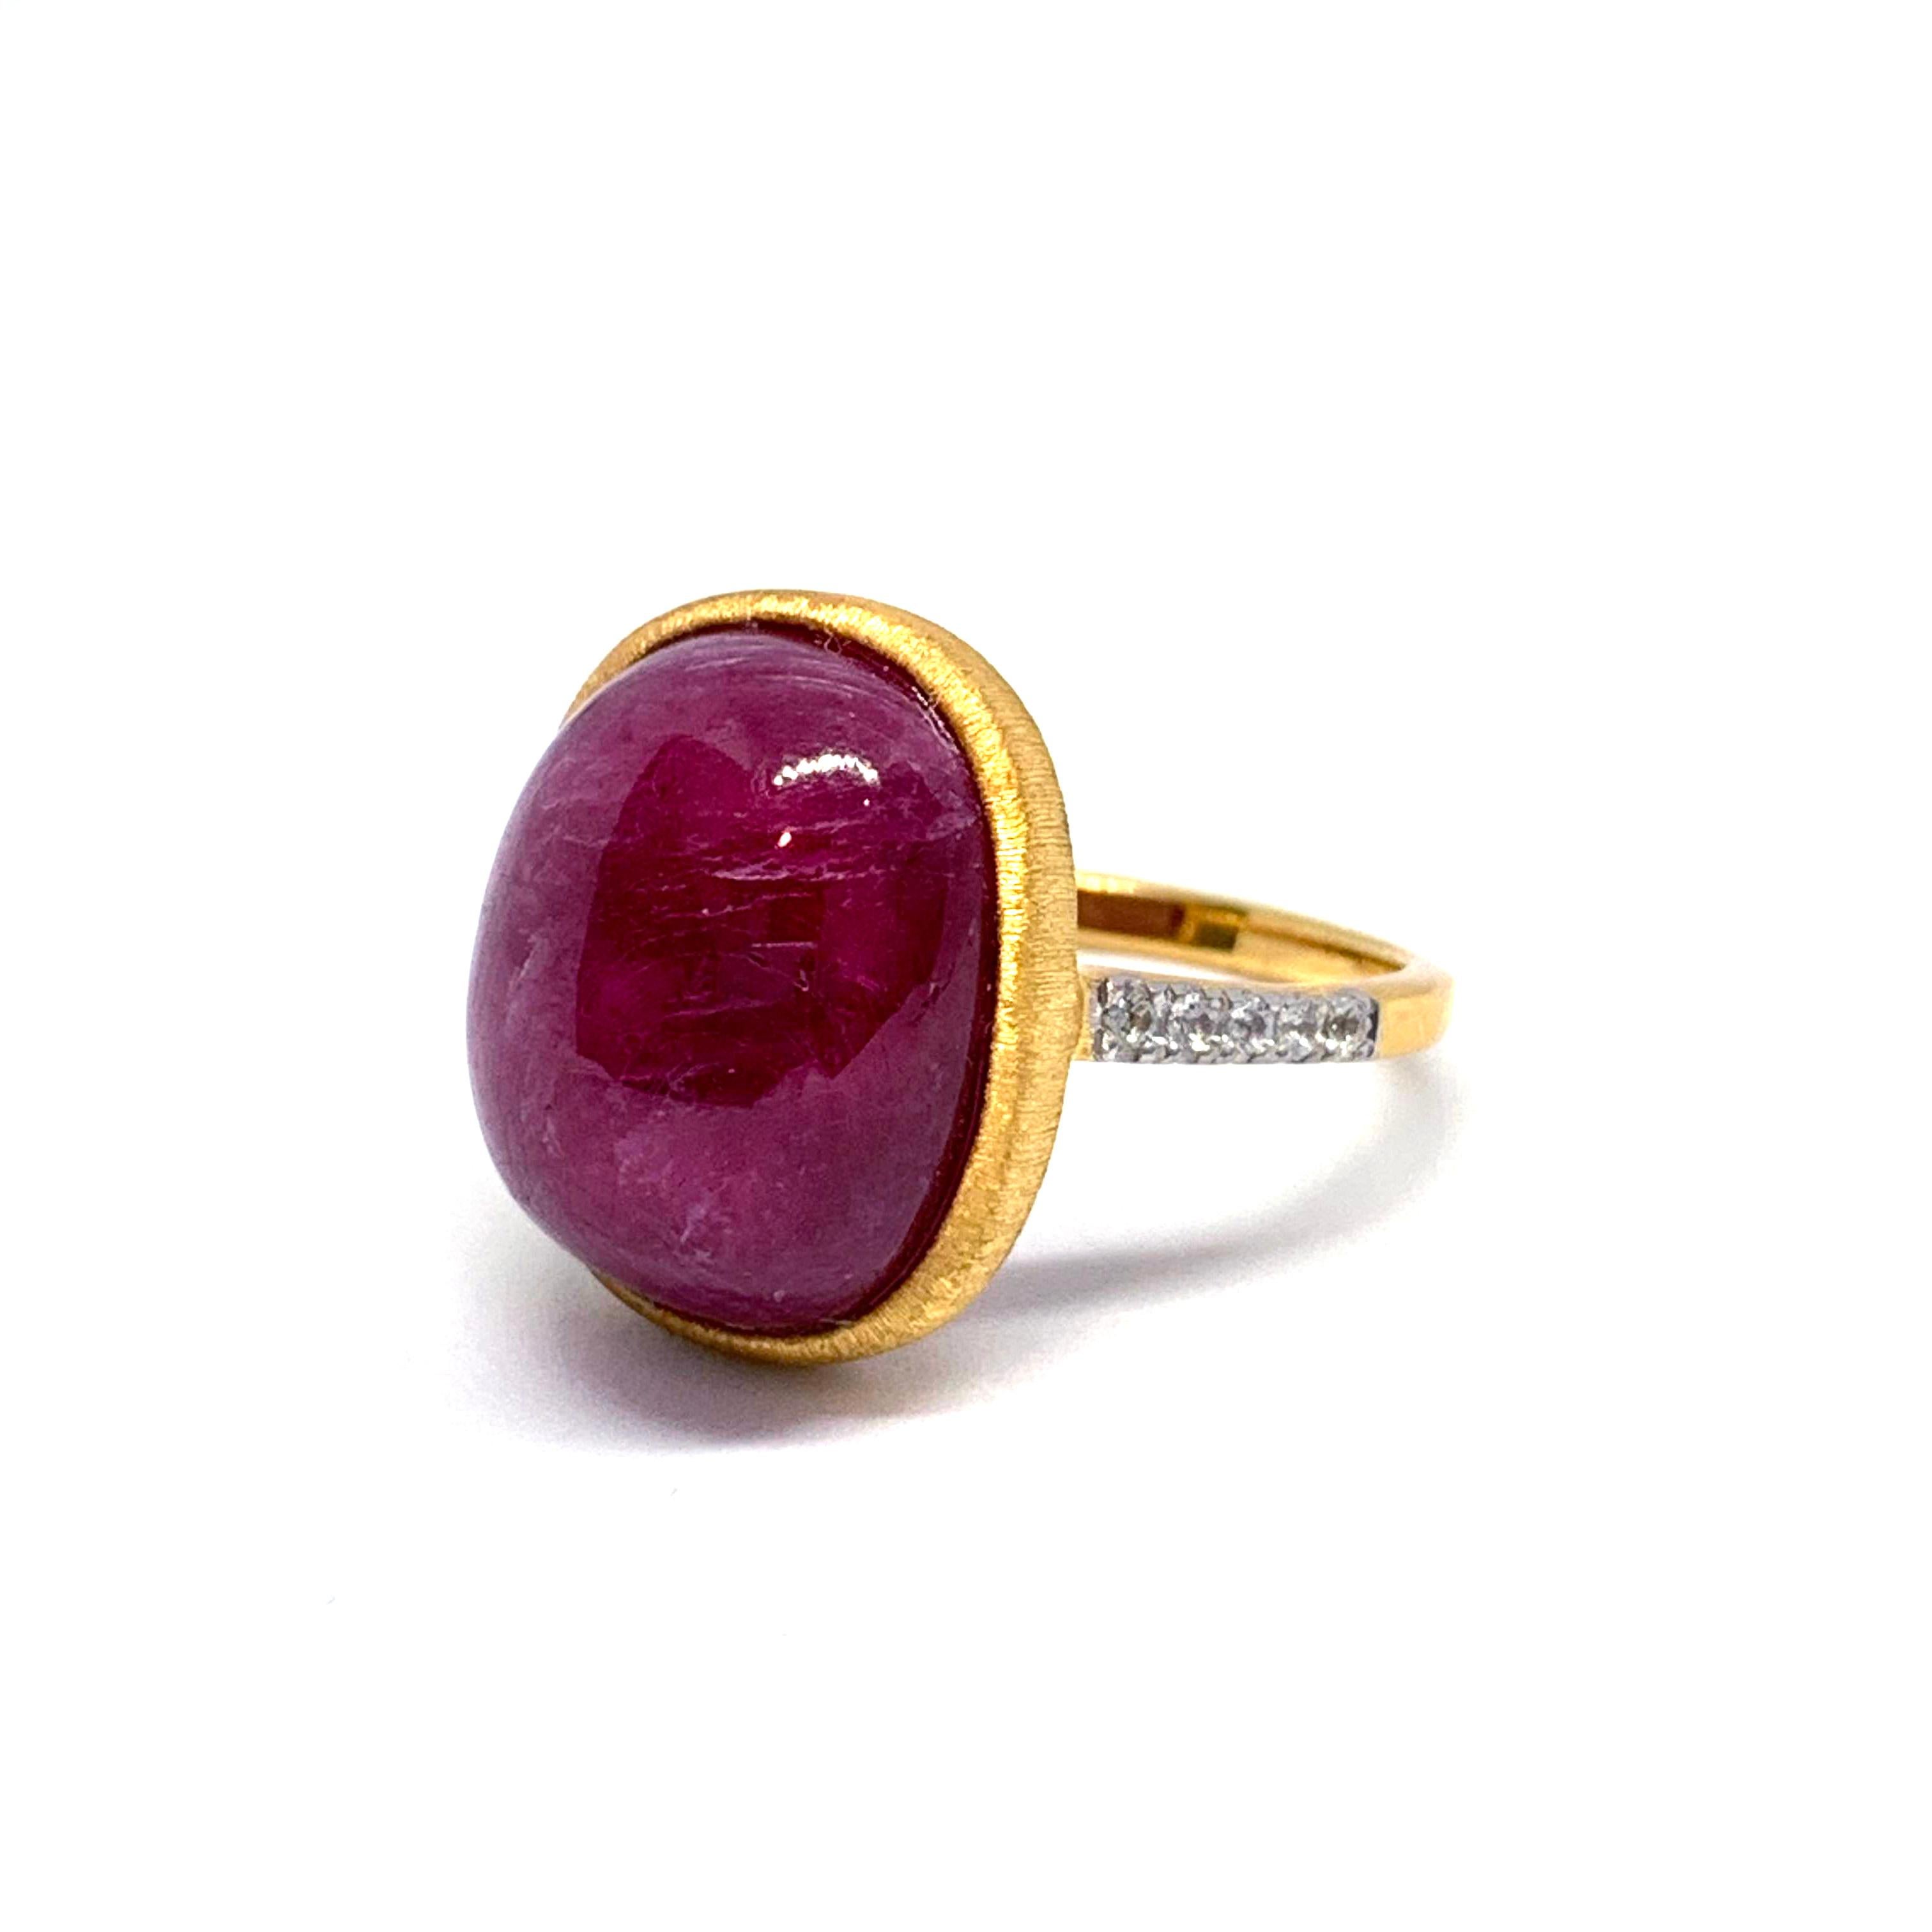 Stunning Bijoux Num Genuine Oval Ruby Vermeil Earrings. 
This ring features a beautiful 23.5ct pink-ish oval cabochon-cut Mozambique ruby, adorned with genuine round white topaz, handset in 18k gold vermeil over sterling silver, and finished with